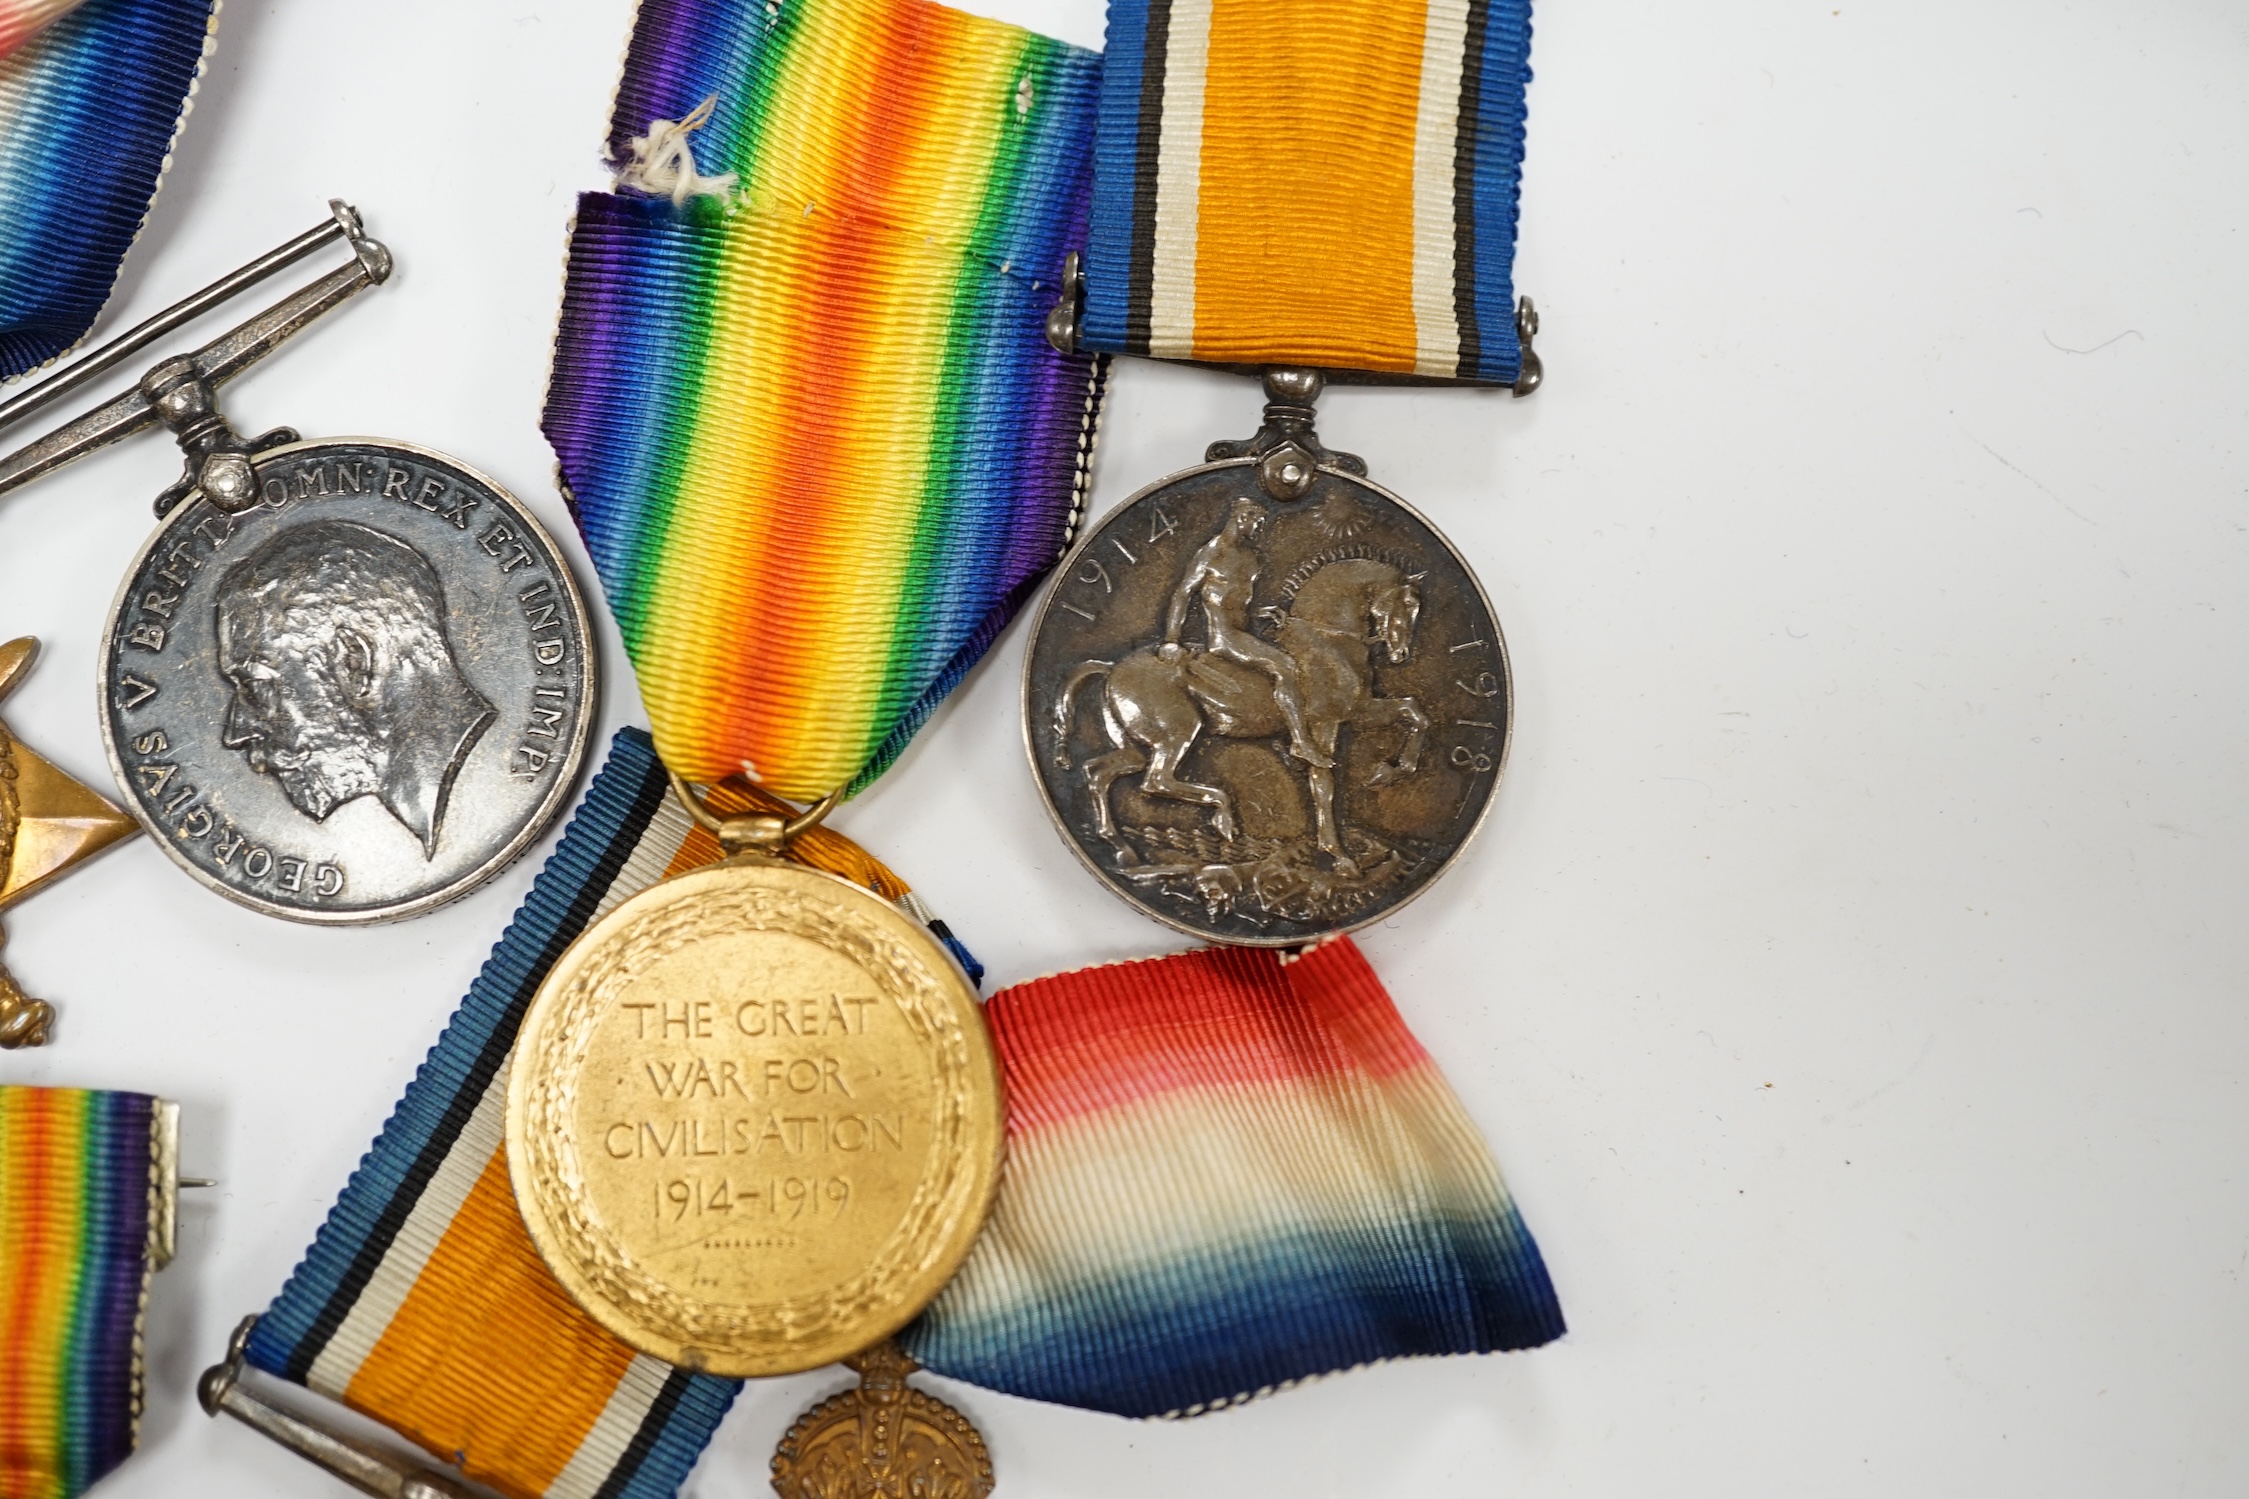 Three First World War medal trios awarded to; Pte. W.C. Belfrage 3rd Canadian MTD Rifles, Cpl. R.W. Wells R.F.A. and Pte. F.G. Walker R.A.M.C. together with two additional British war medals, two miniature metal groups,